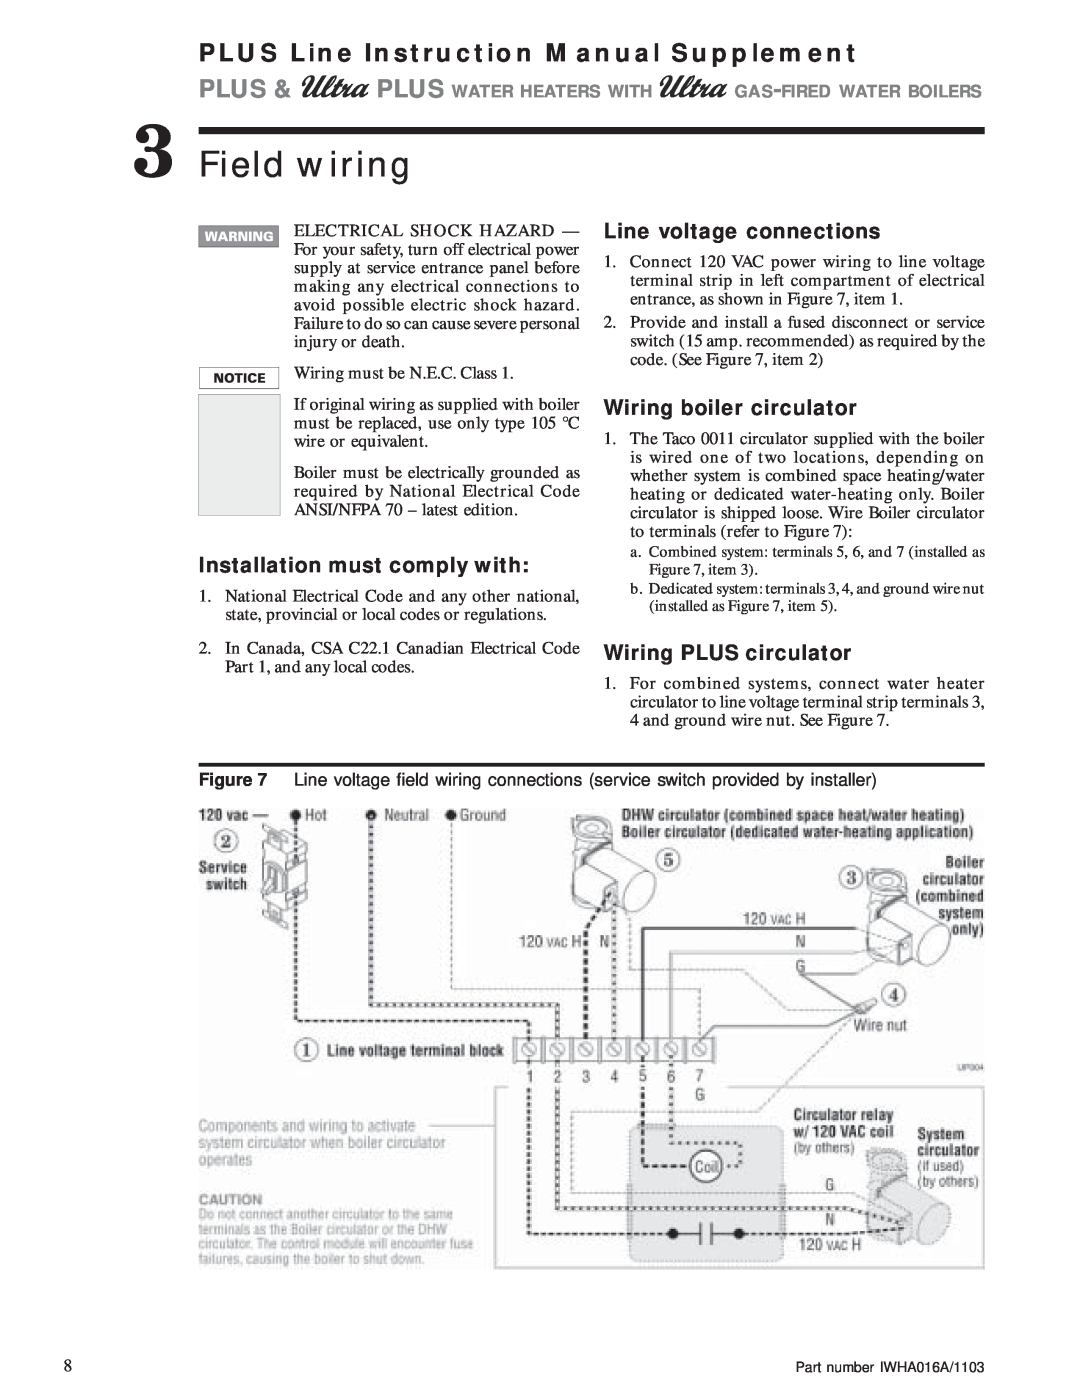 Weil-McLain Electric Water Heater instruction manual Field wiring, Installation must comply with, Line voltage connections 